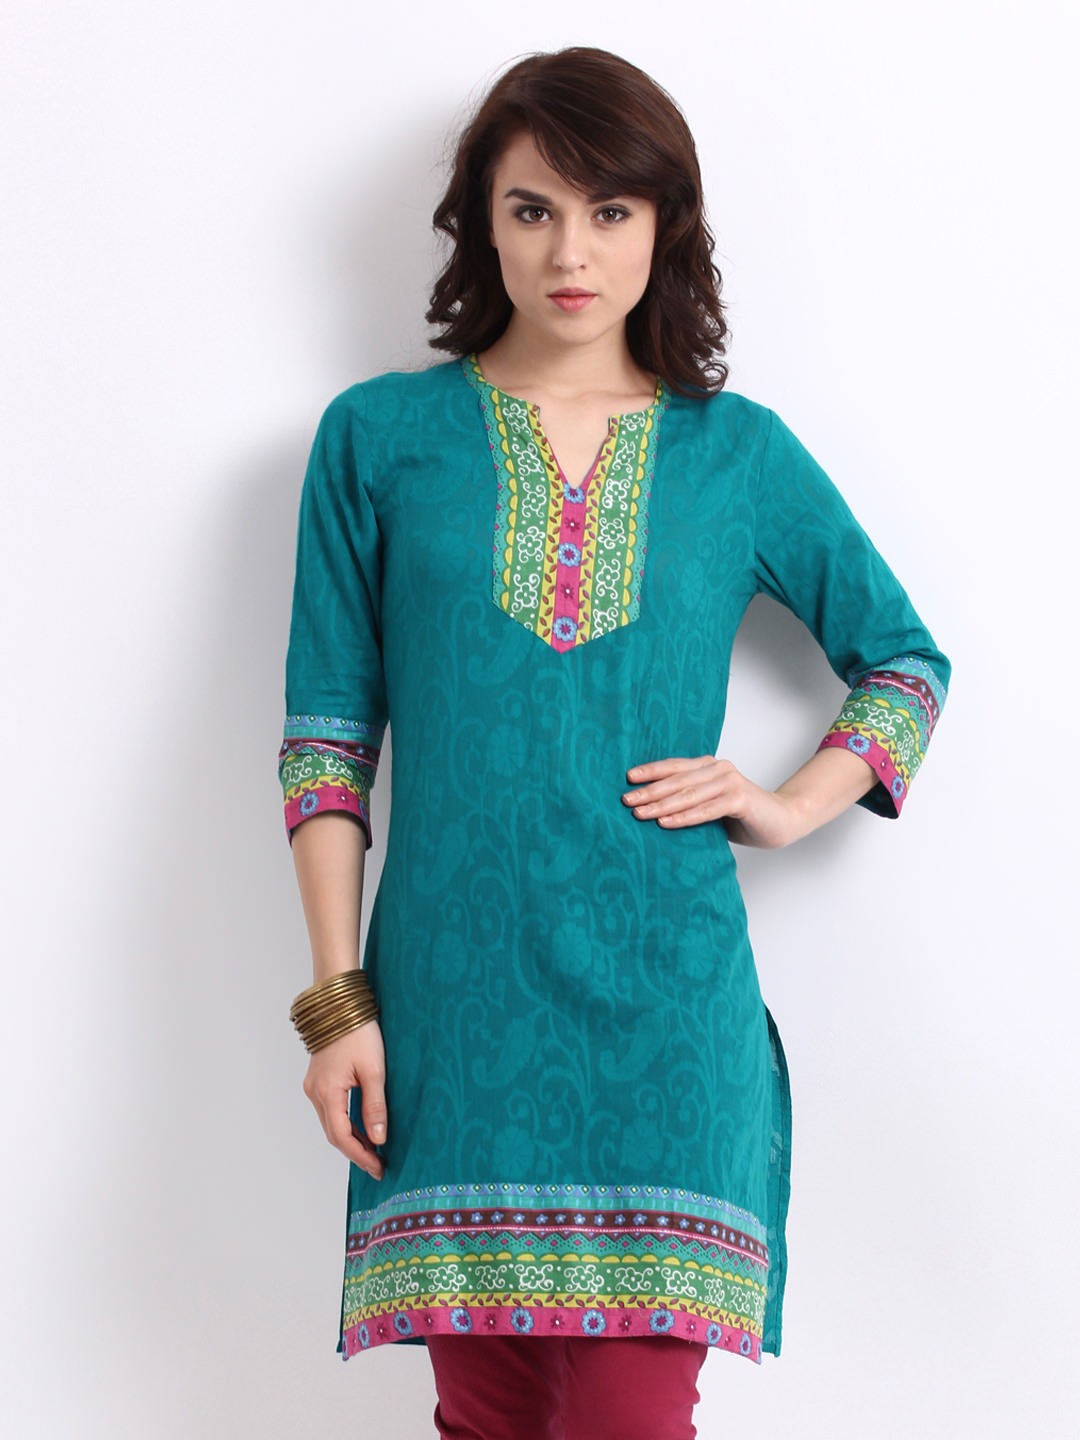 Blue Jacquard Kurta for Woman,(Perfect Gift For Women) Super Fast Delivery : Your Daughter, GF and Wife will have big Smile and Happiness